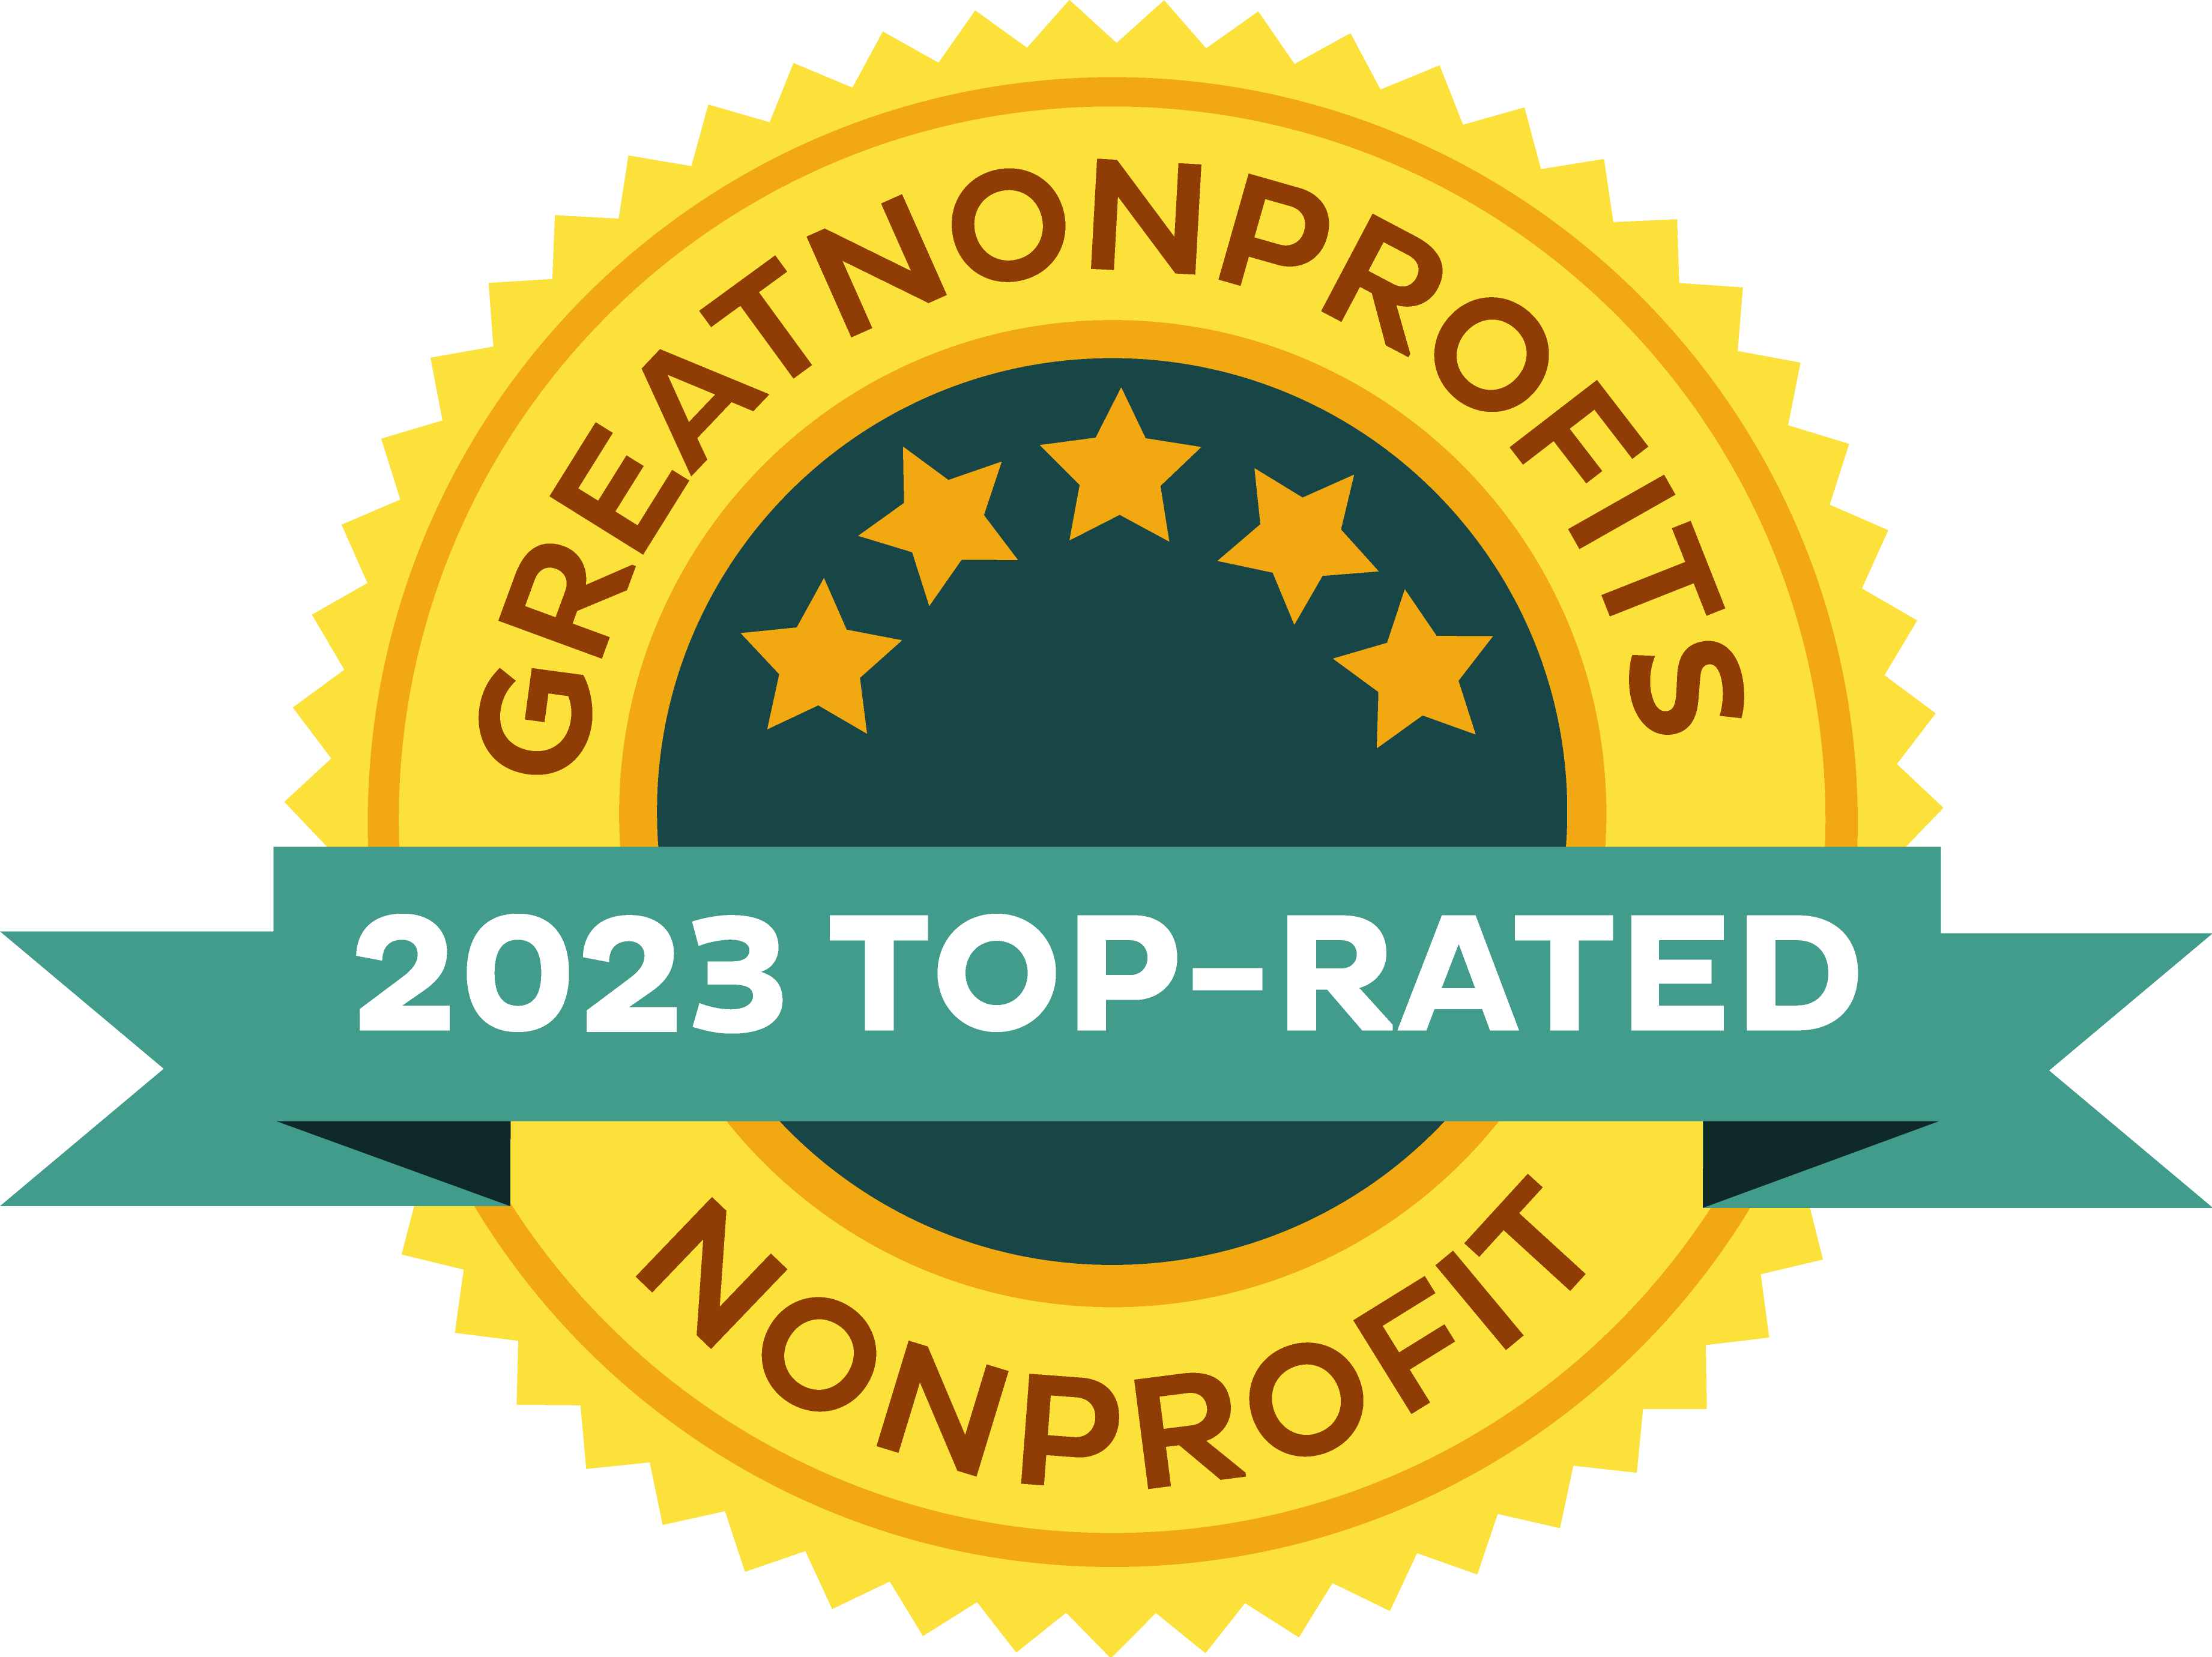 Great Nonprofits 2023 Top-Rated badge in yellow and green.